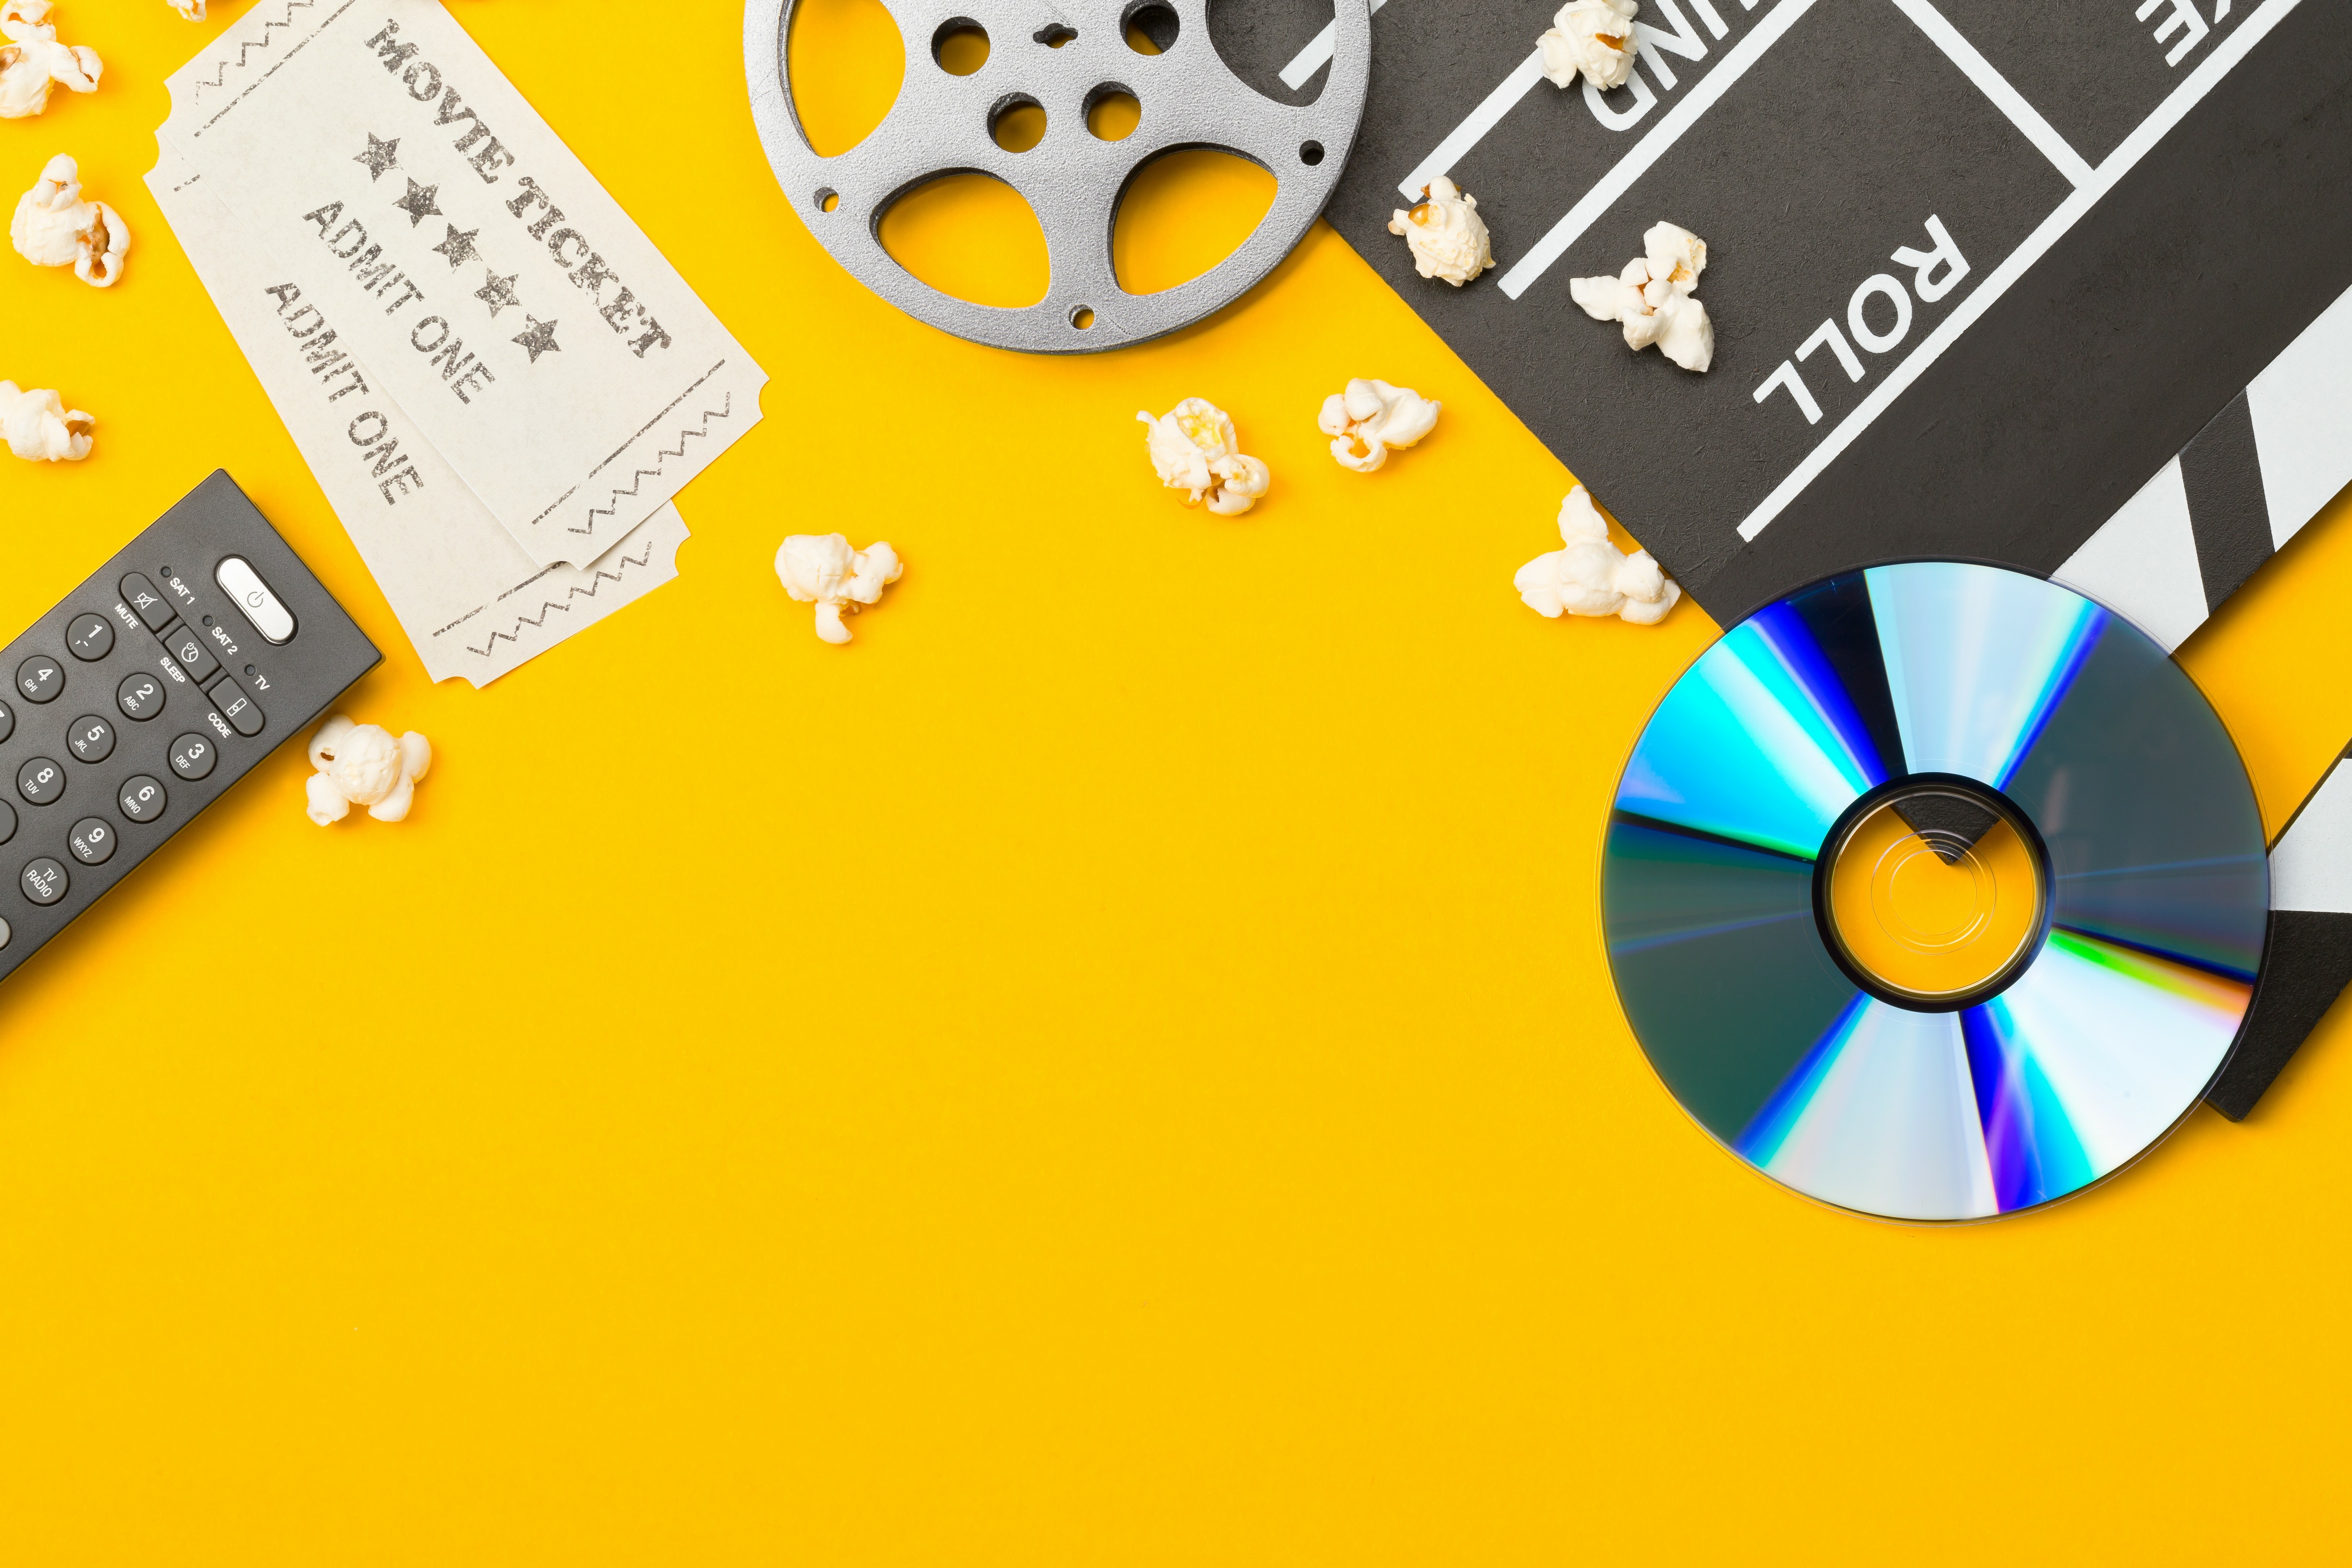 A composed scene of movie related items such as popcorn and DVDs.